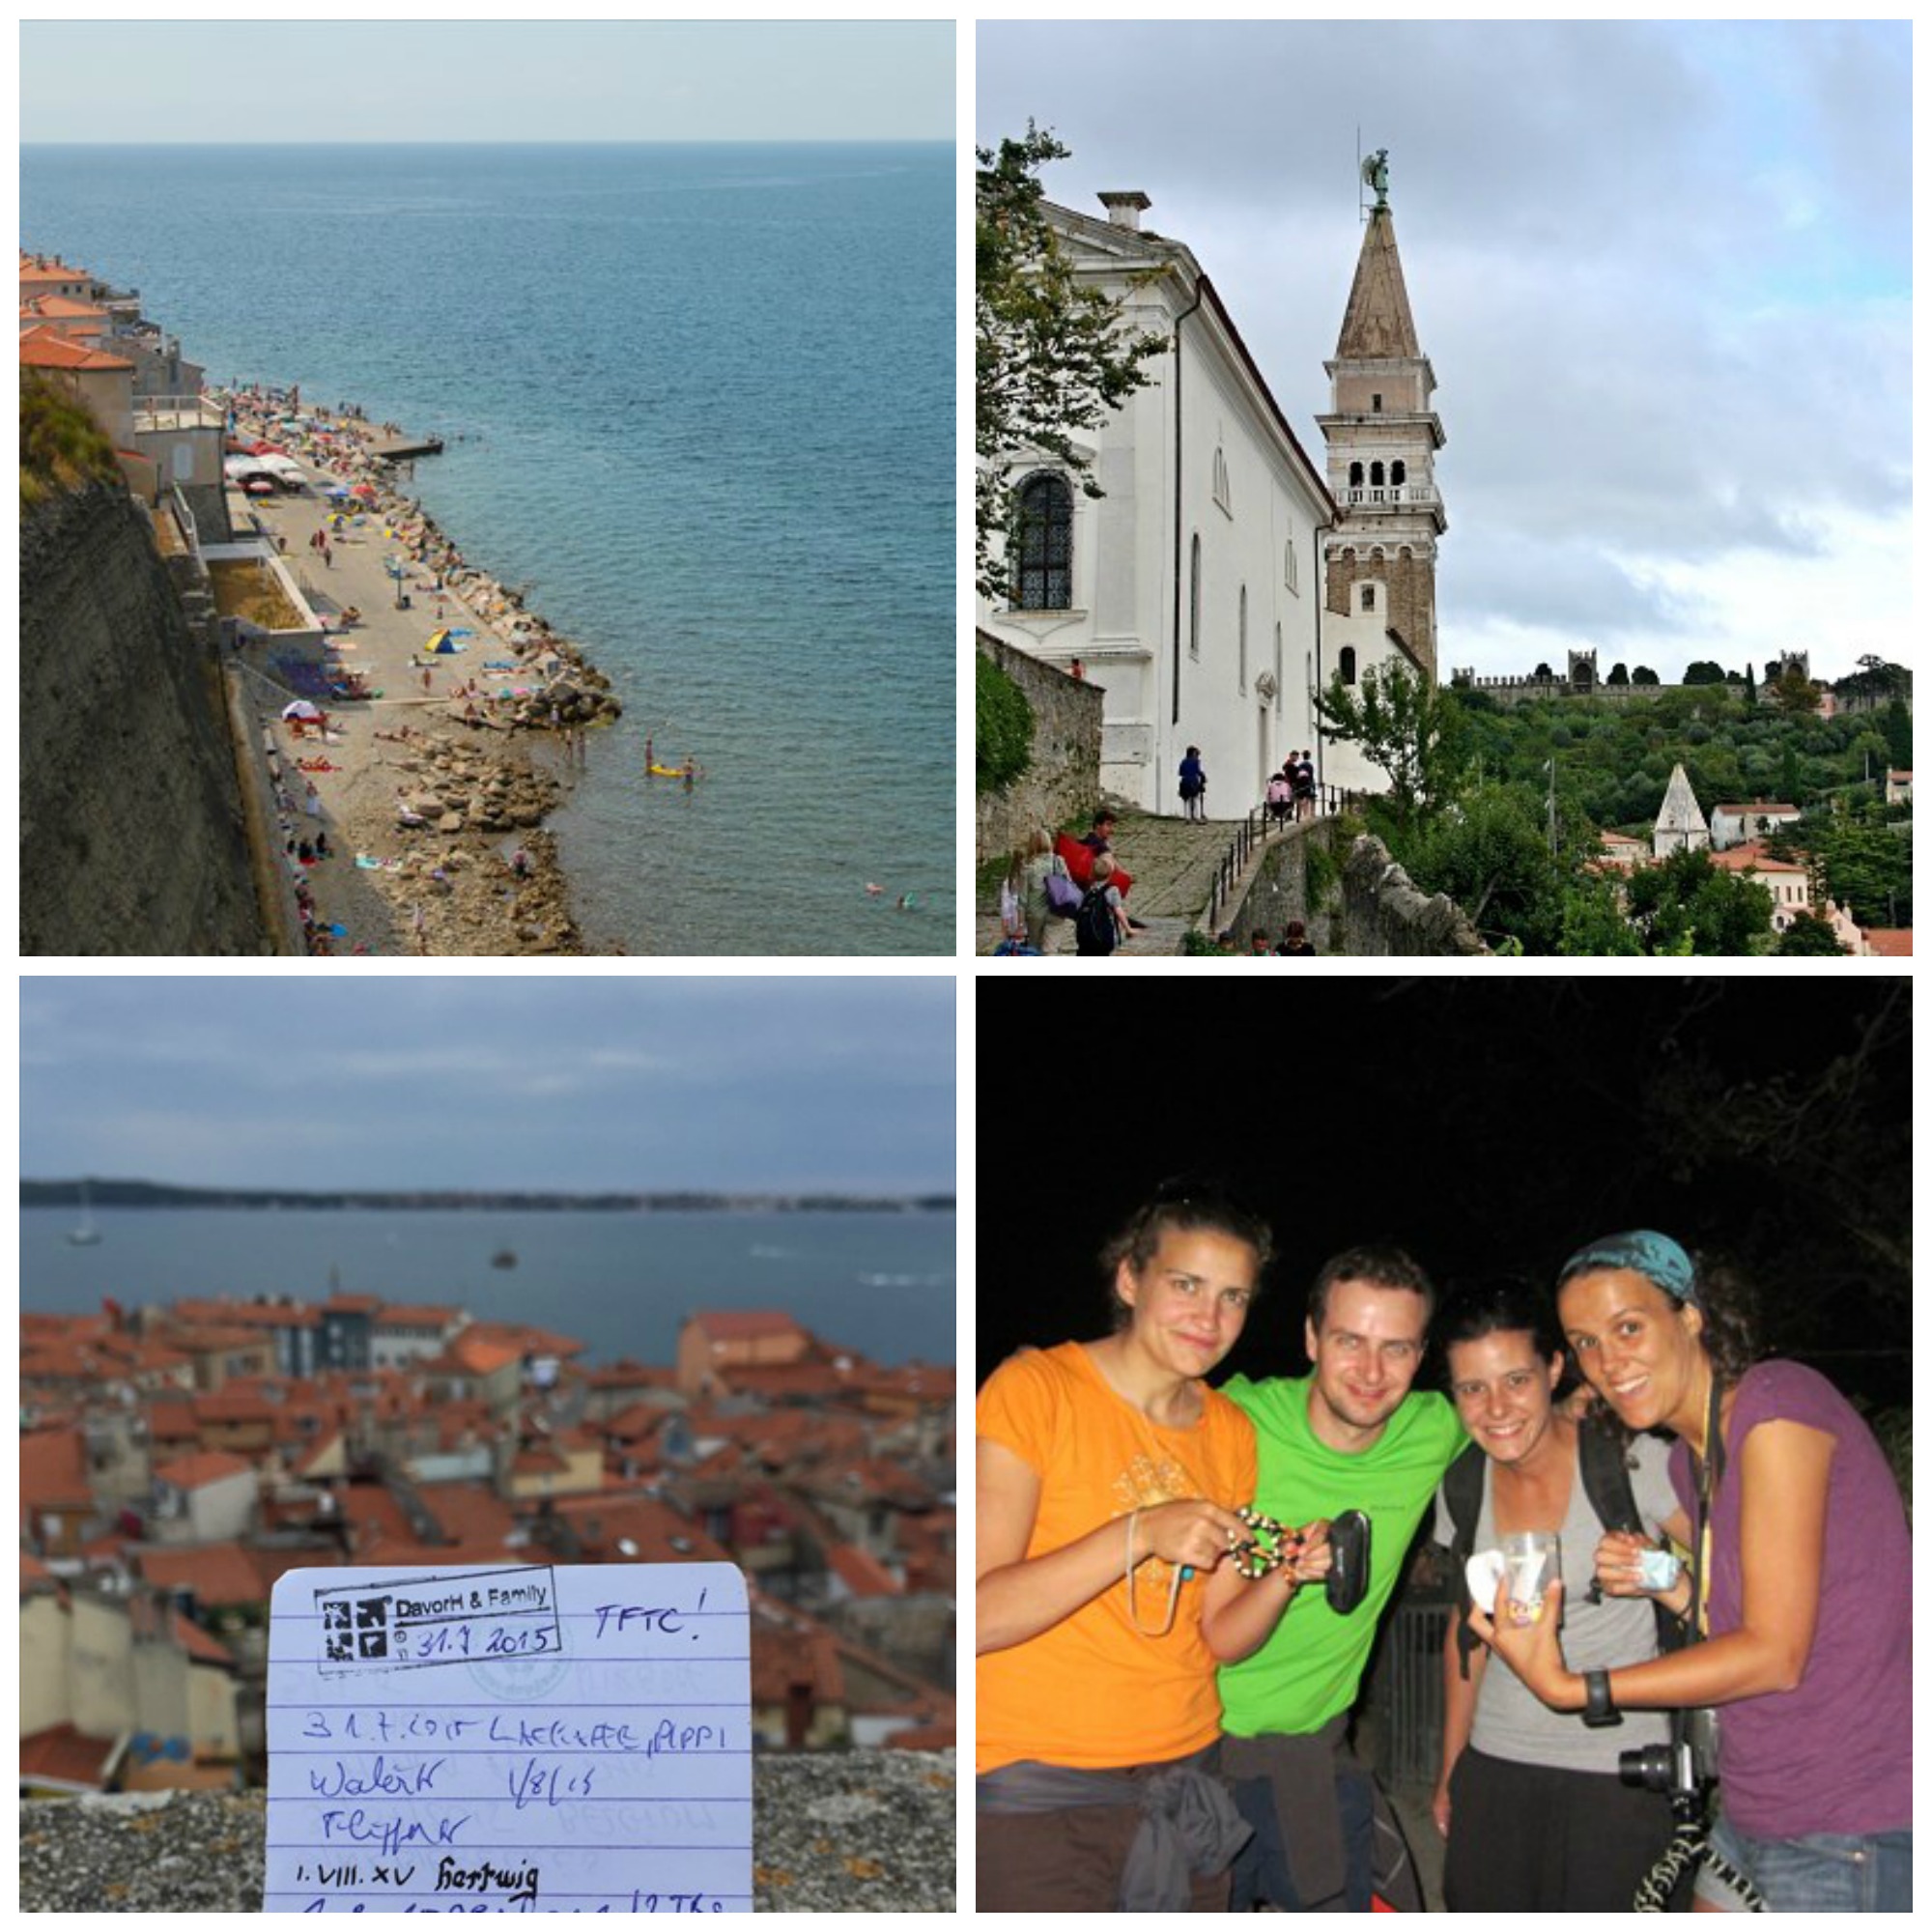 GC3QWBD Morigenos is a Traditional Cache in the seaside town of Piran